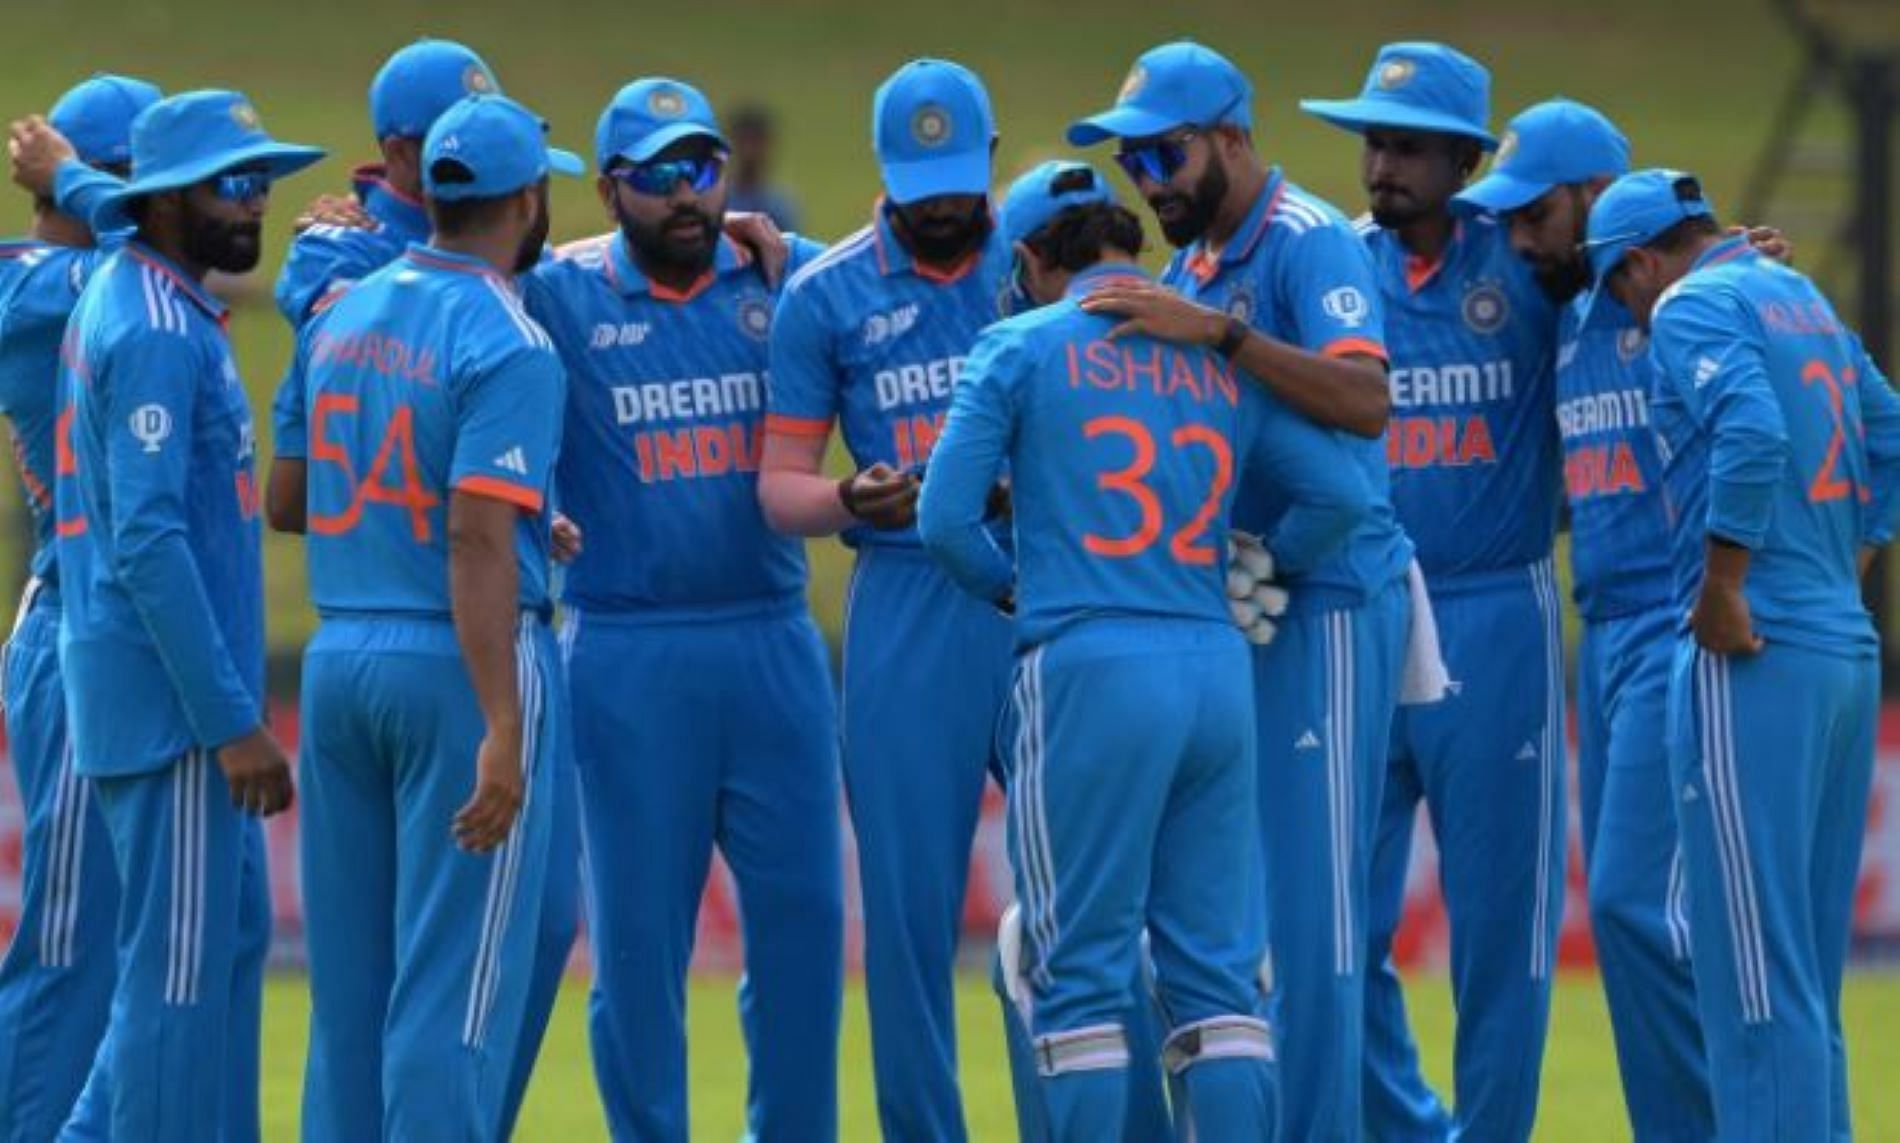 Team India has been in red-hot form leading up to and in the World Cup.